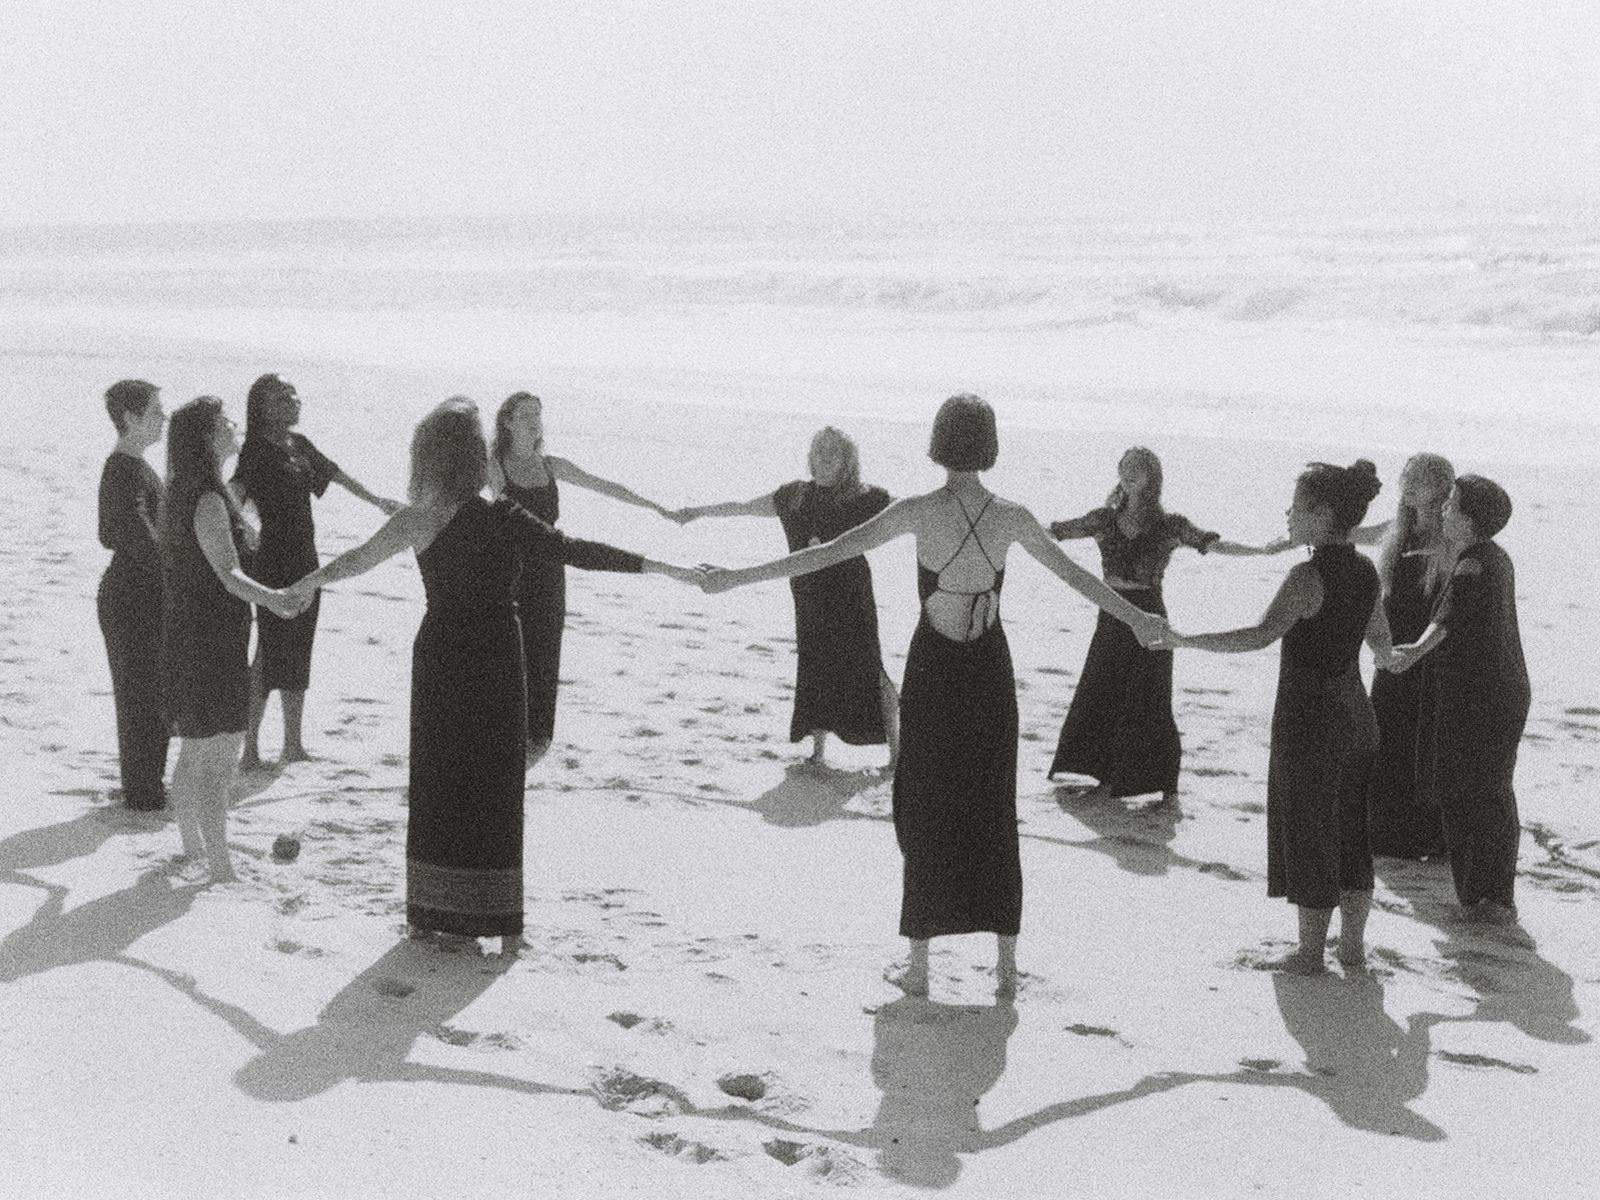 A group of 11 people stand in a large circle on a beach, their hands held to join the circle.